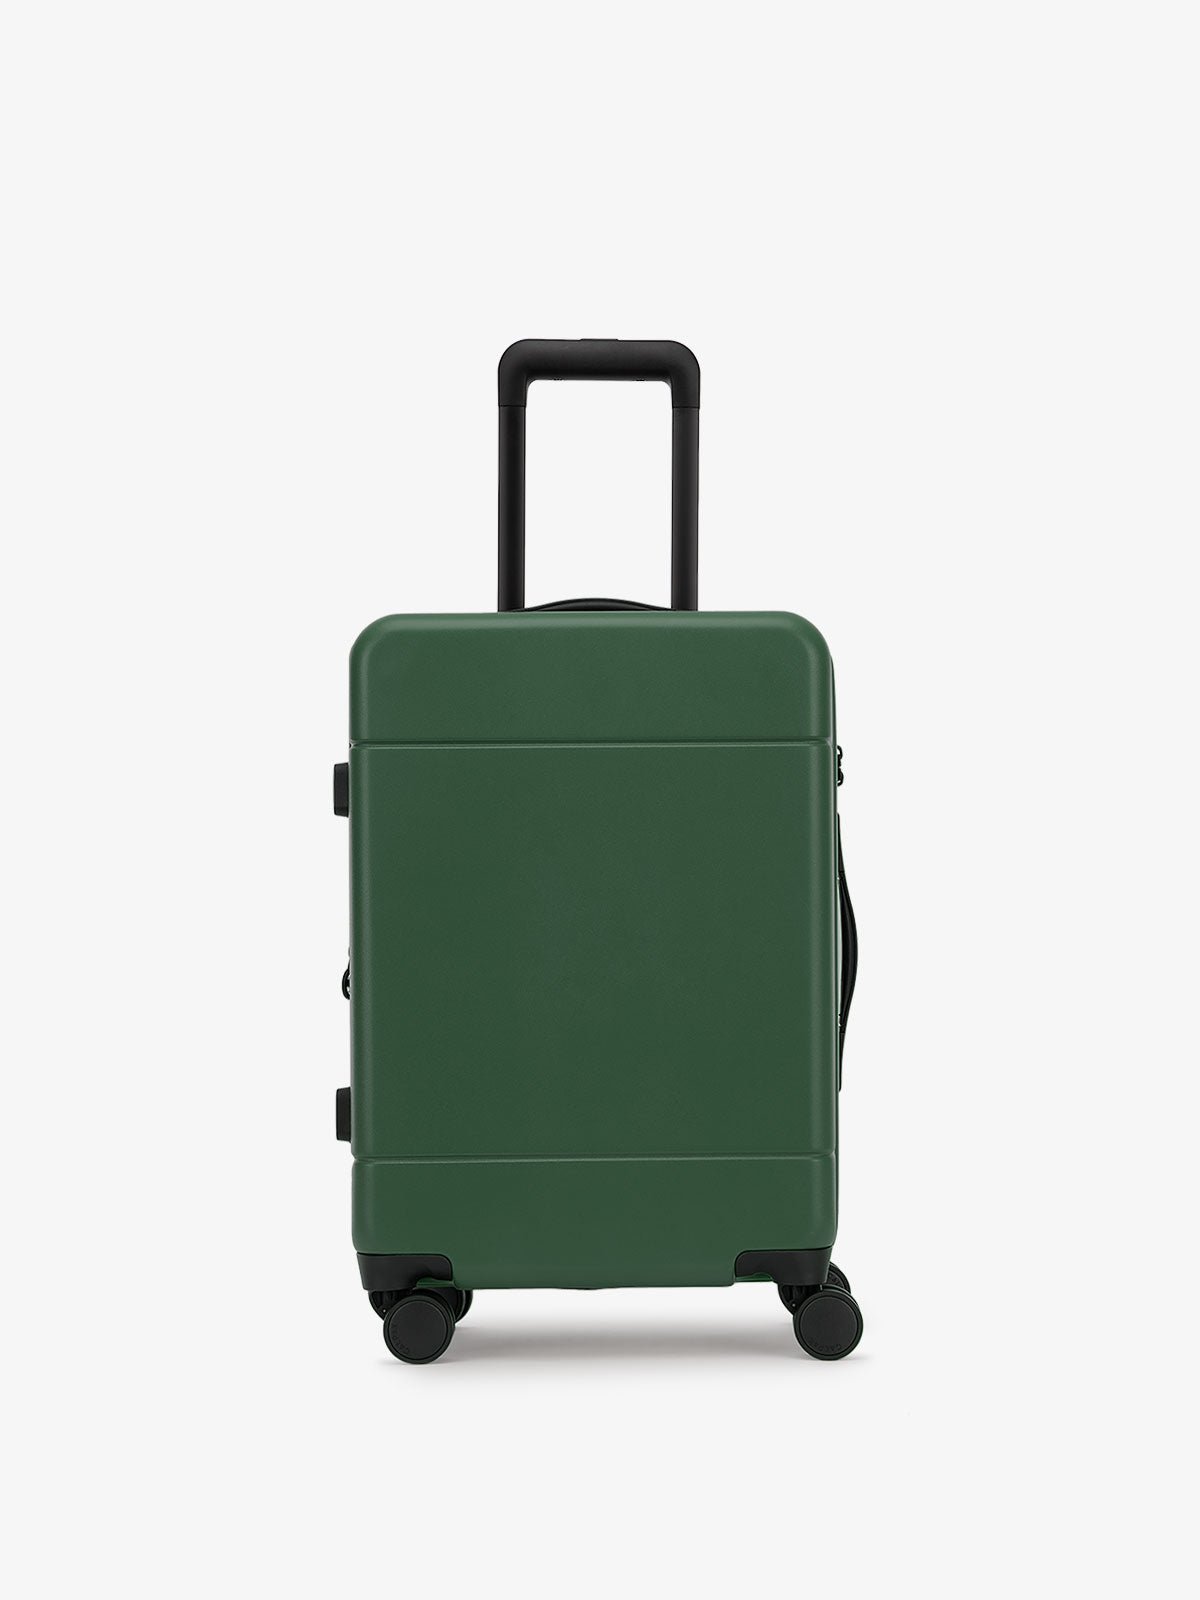 Hue hard shell rolling carry on luggage in green emerald